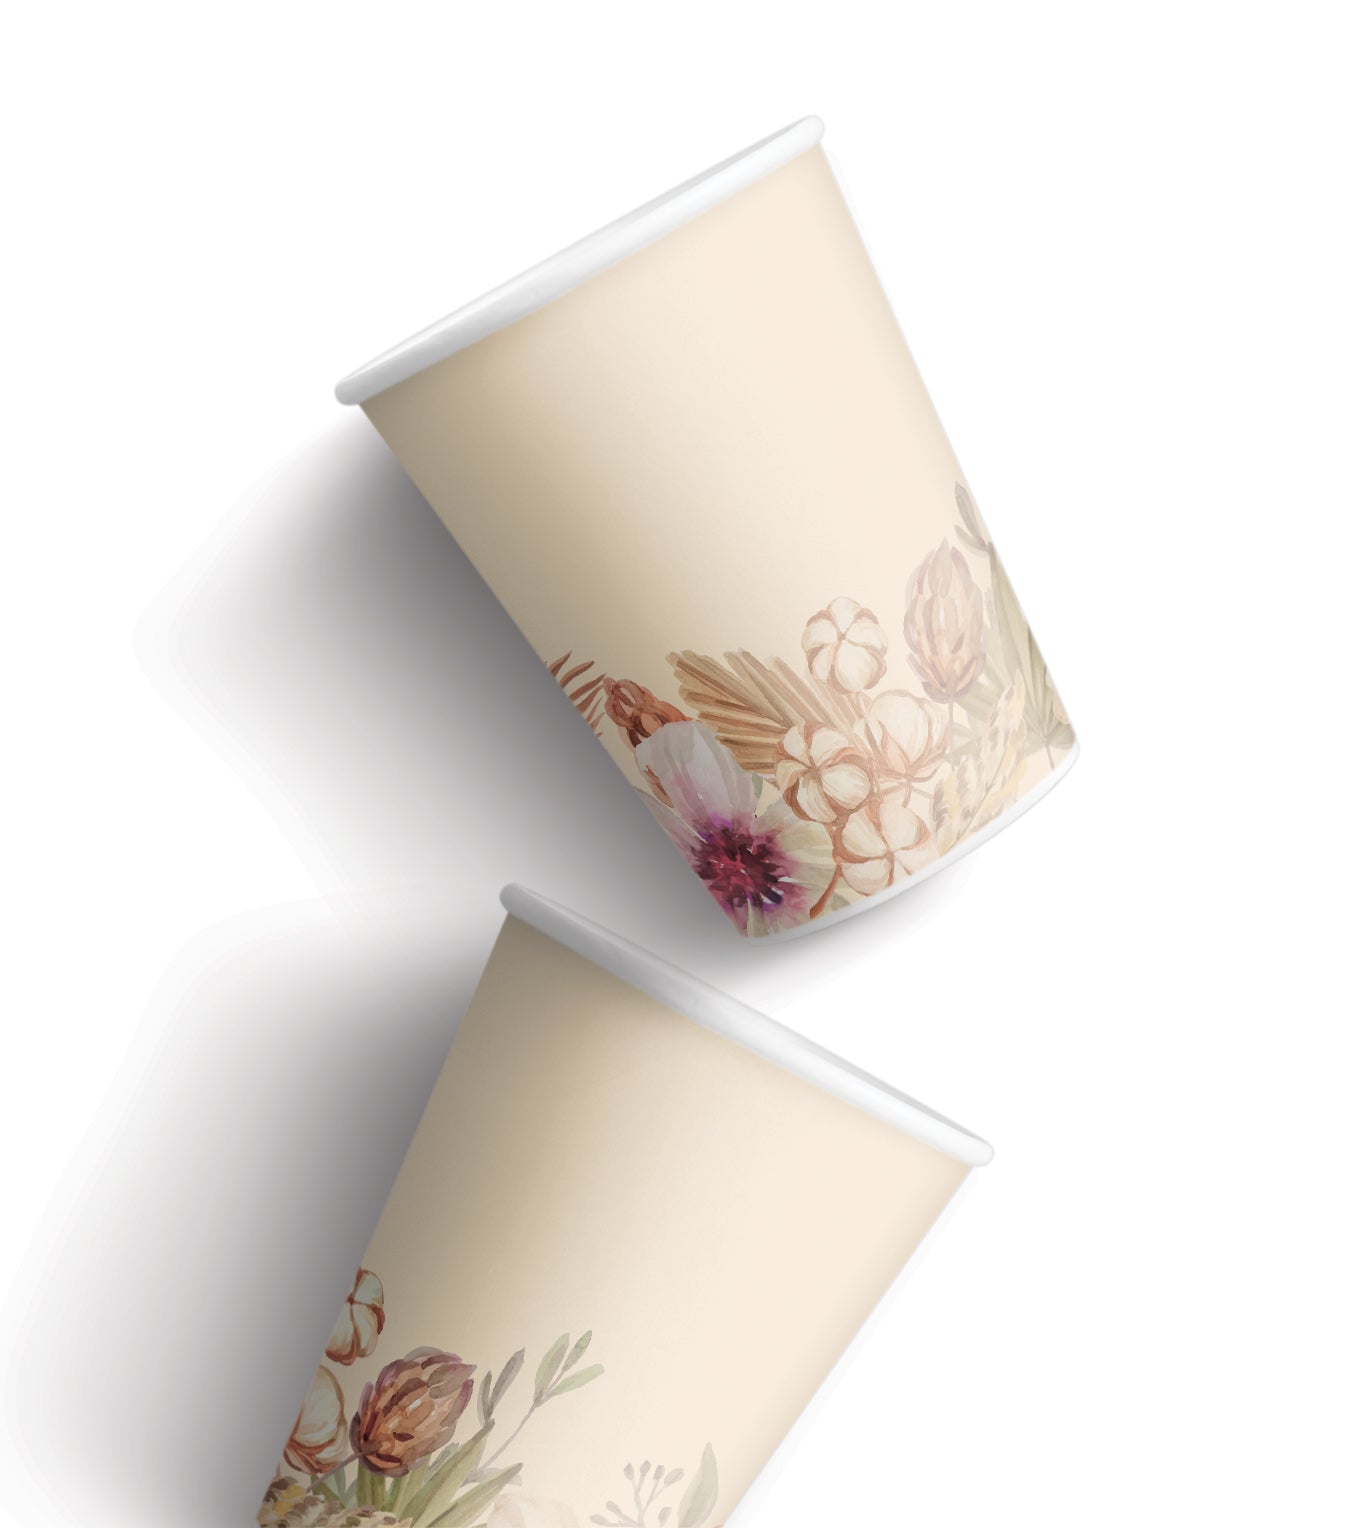 Paper Drinking Cup without plastic- lining suitable for hot & cold drinks